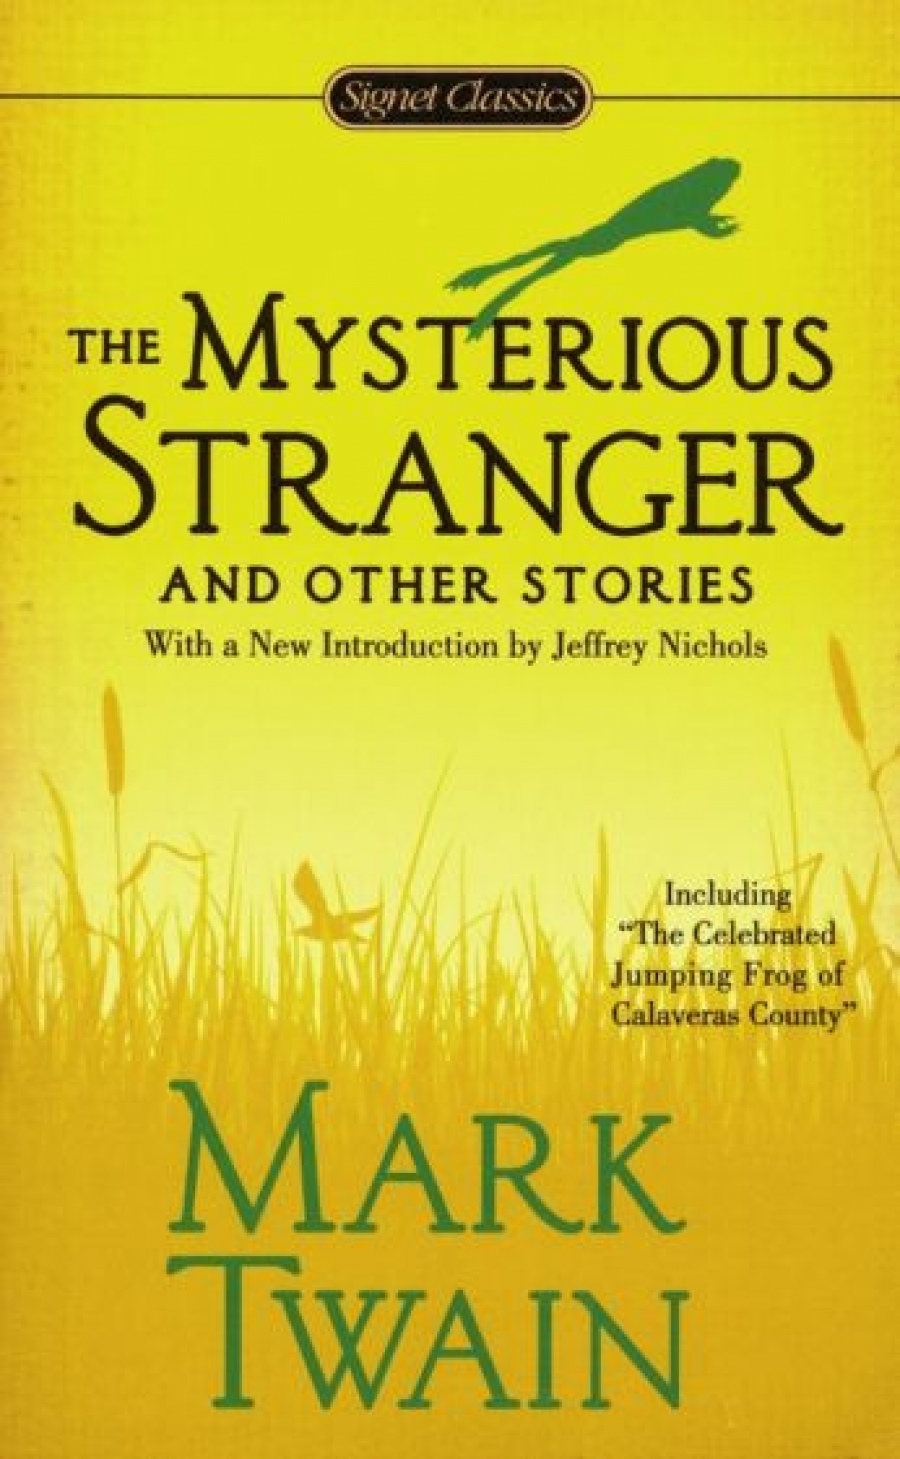 Twain Mark The Mysterious Stranger and Other Stories 